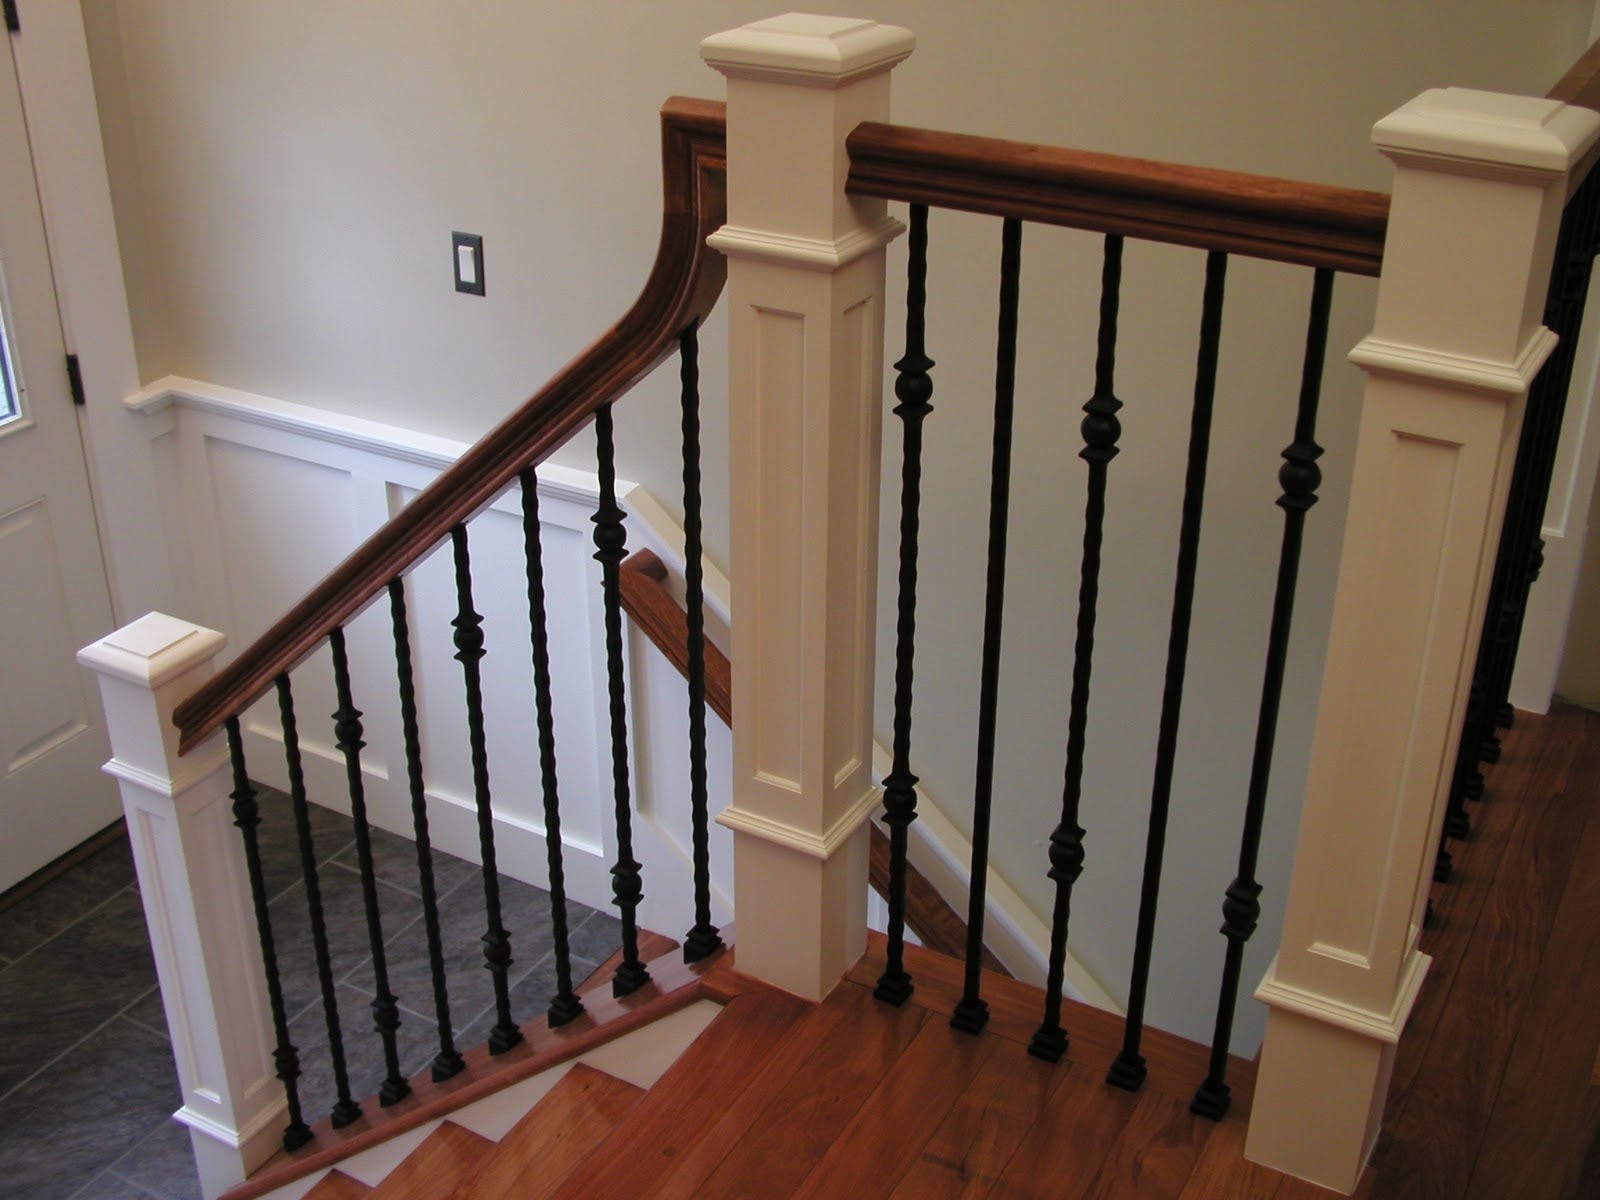 Image 55 of New Banister And Spindles